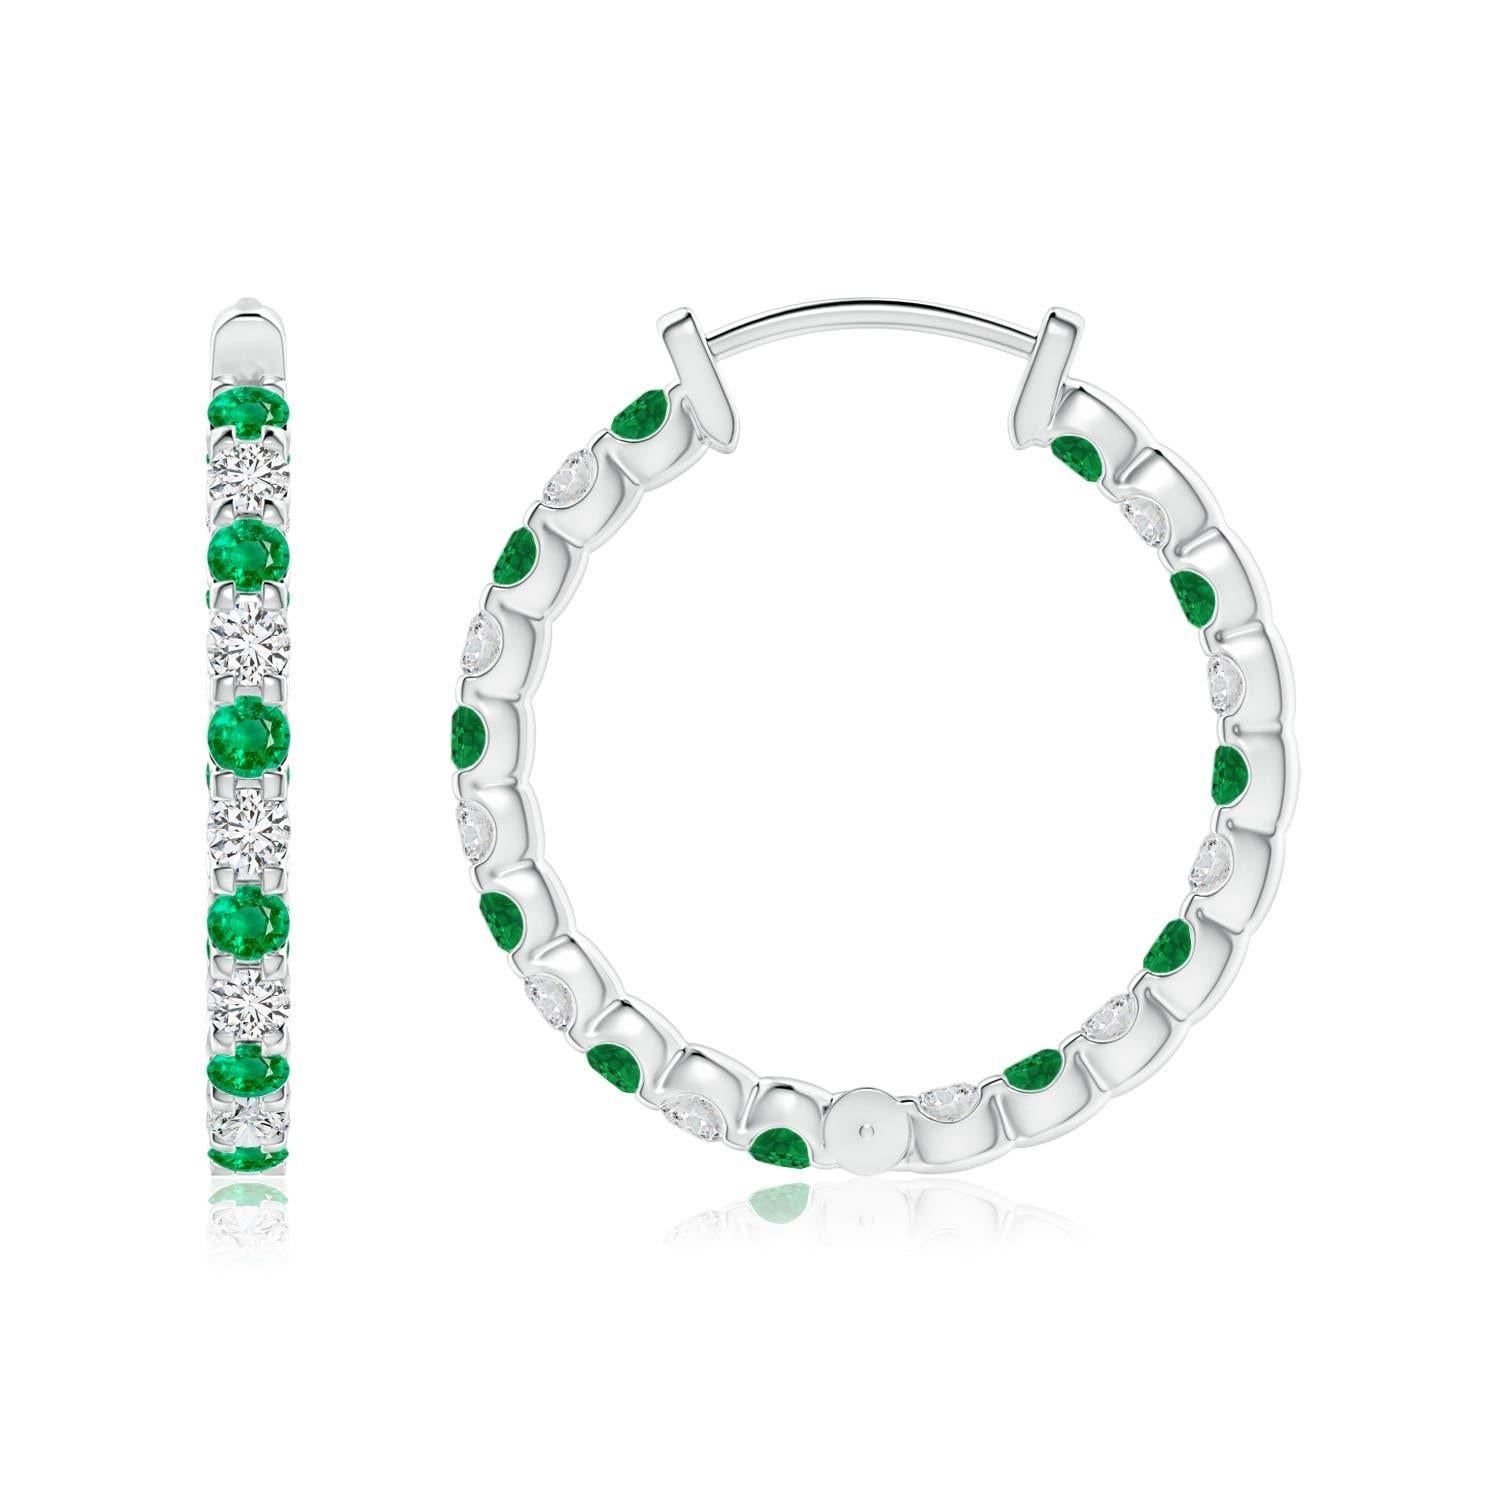 Alternately secured in prong settings are lush green emeralds and brilliant diamonds on these stunning hoop earrings. The scintillating gems are embellished on the outside as well as the inside of these platinum hoops, showcasing a striking contrast